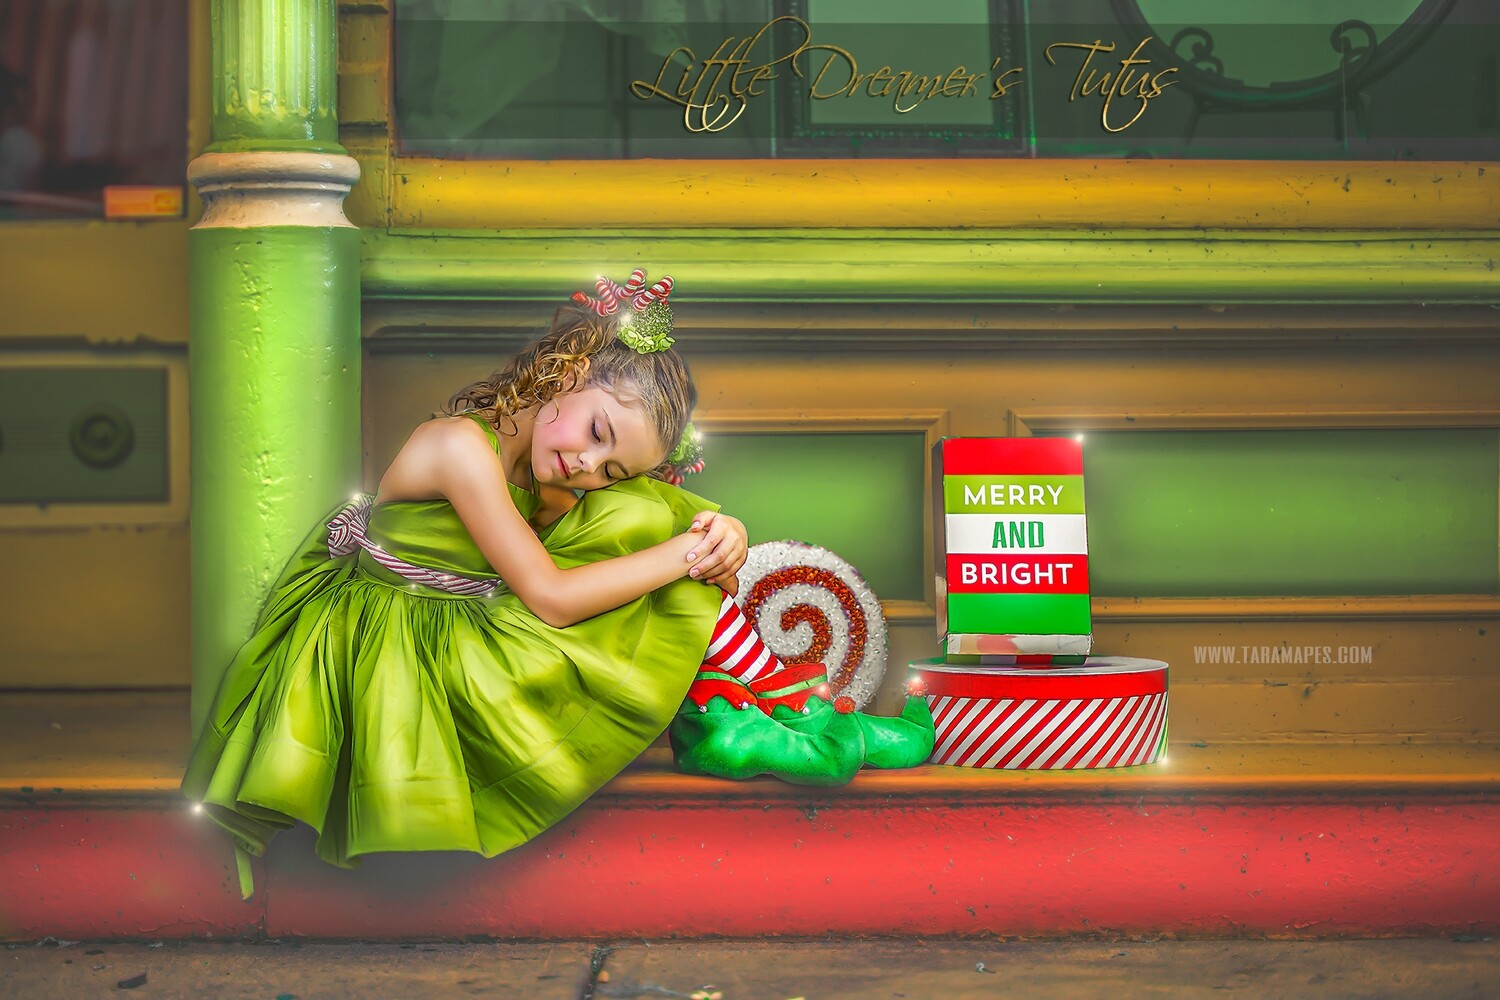 Christmas Digital Backdrop - Storefront Stoop - Christmas Stoop - Christmas Digital Background - FREE SNOW OVERLAY and BLOWING SNOW OVERLAY INCLUDED